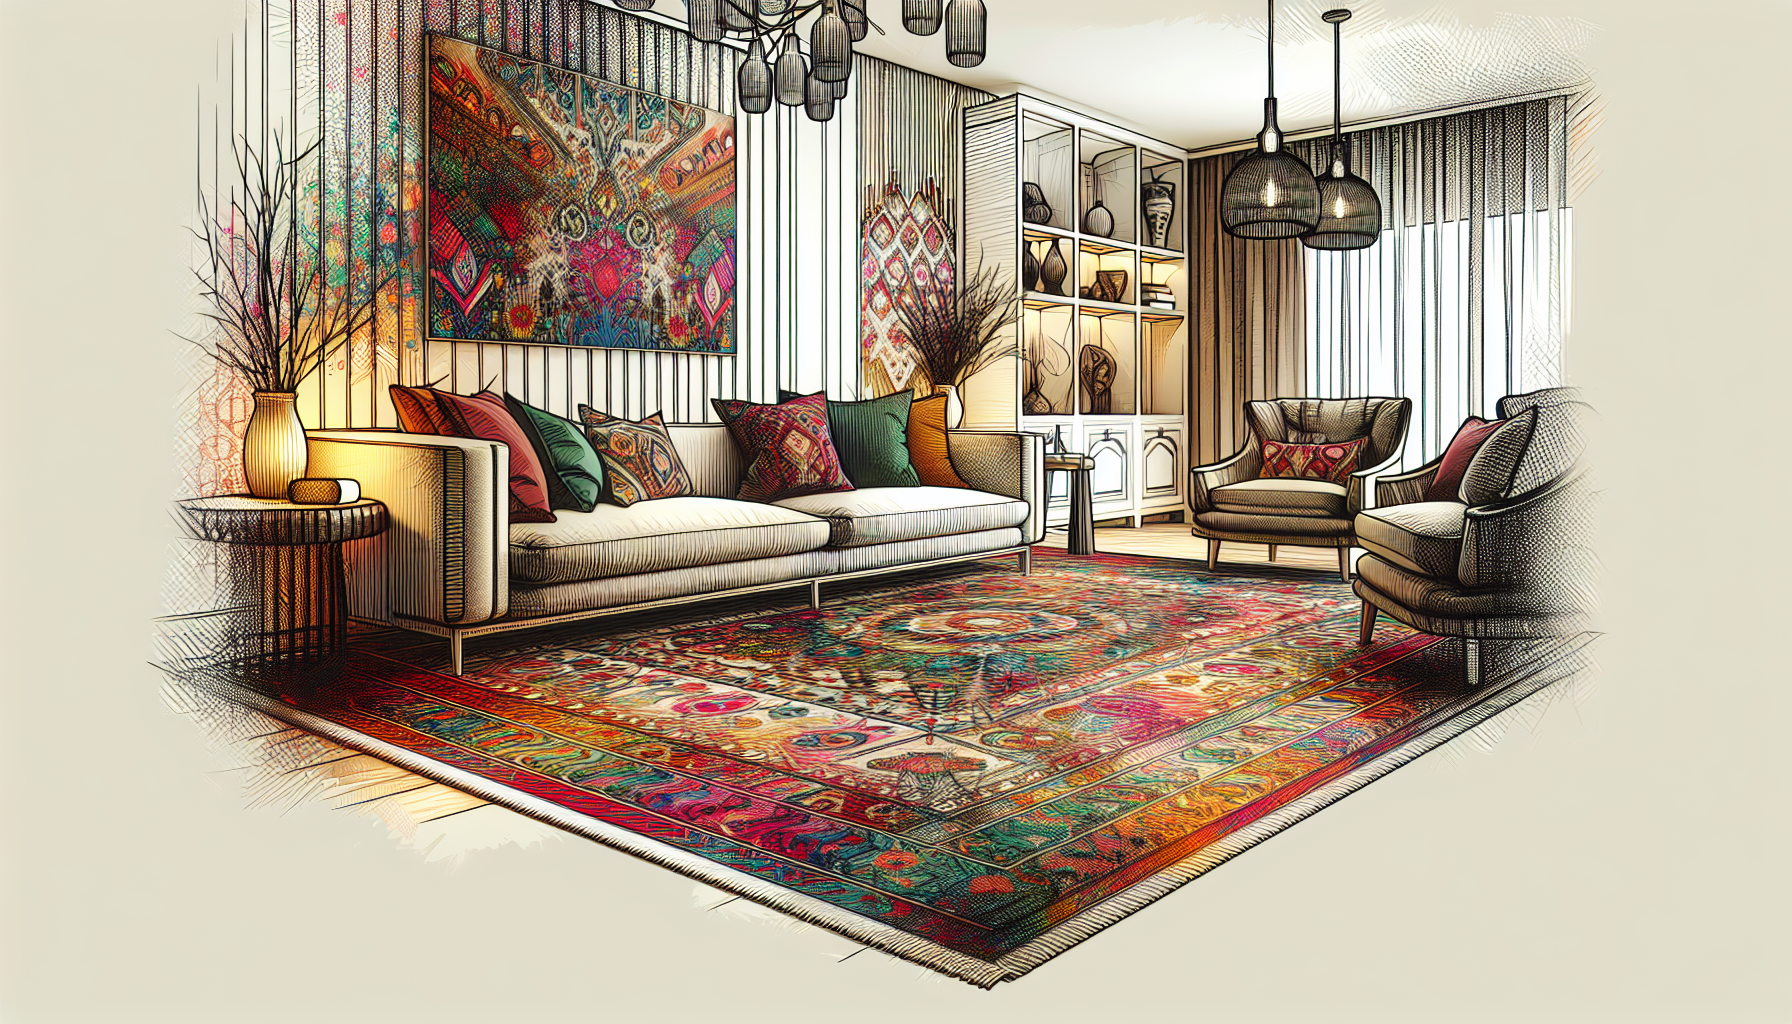 Colorful rug adding visual interest to a neutral living room